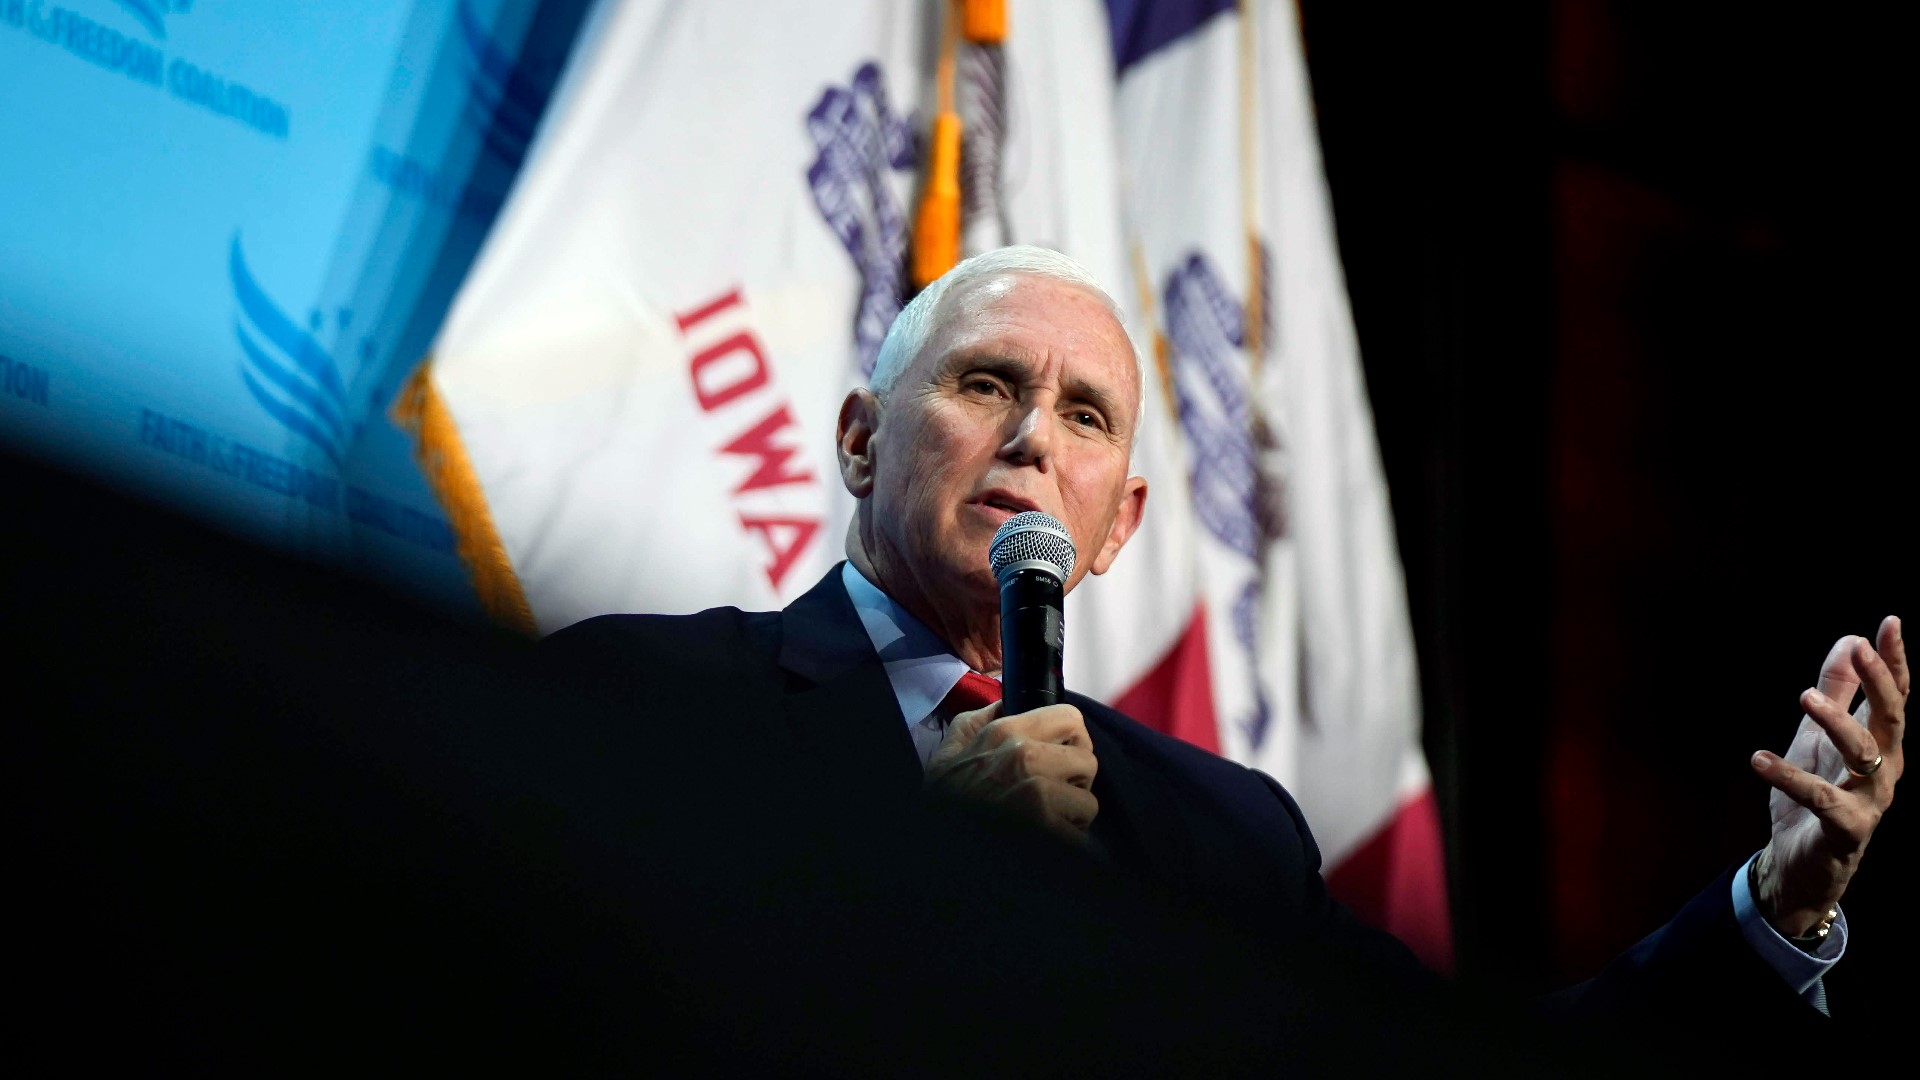 Mike Pence, Ron DeSantis and Vivek Ramaswamy are just three of the Republican candidates who attended the event.